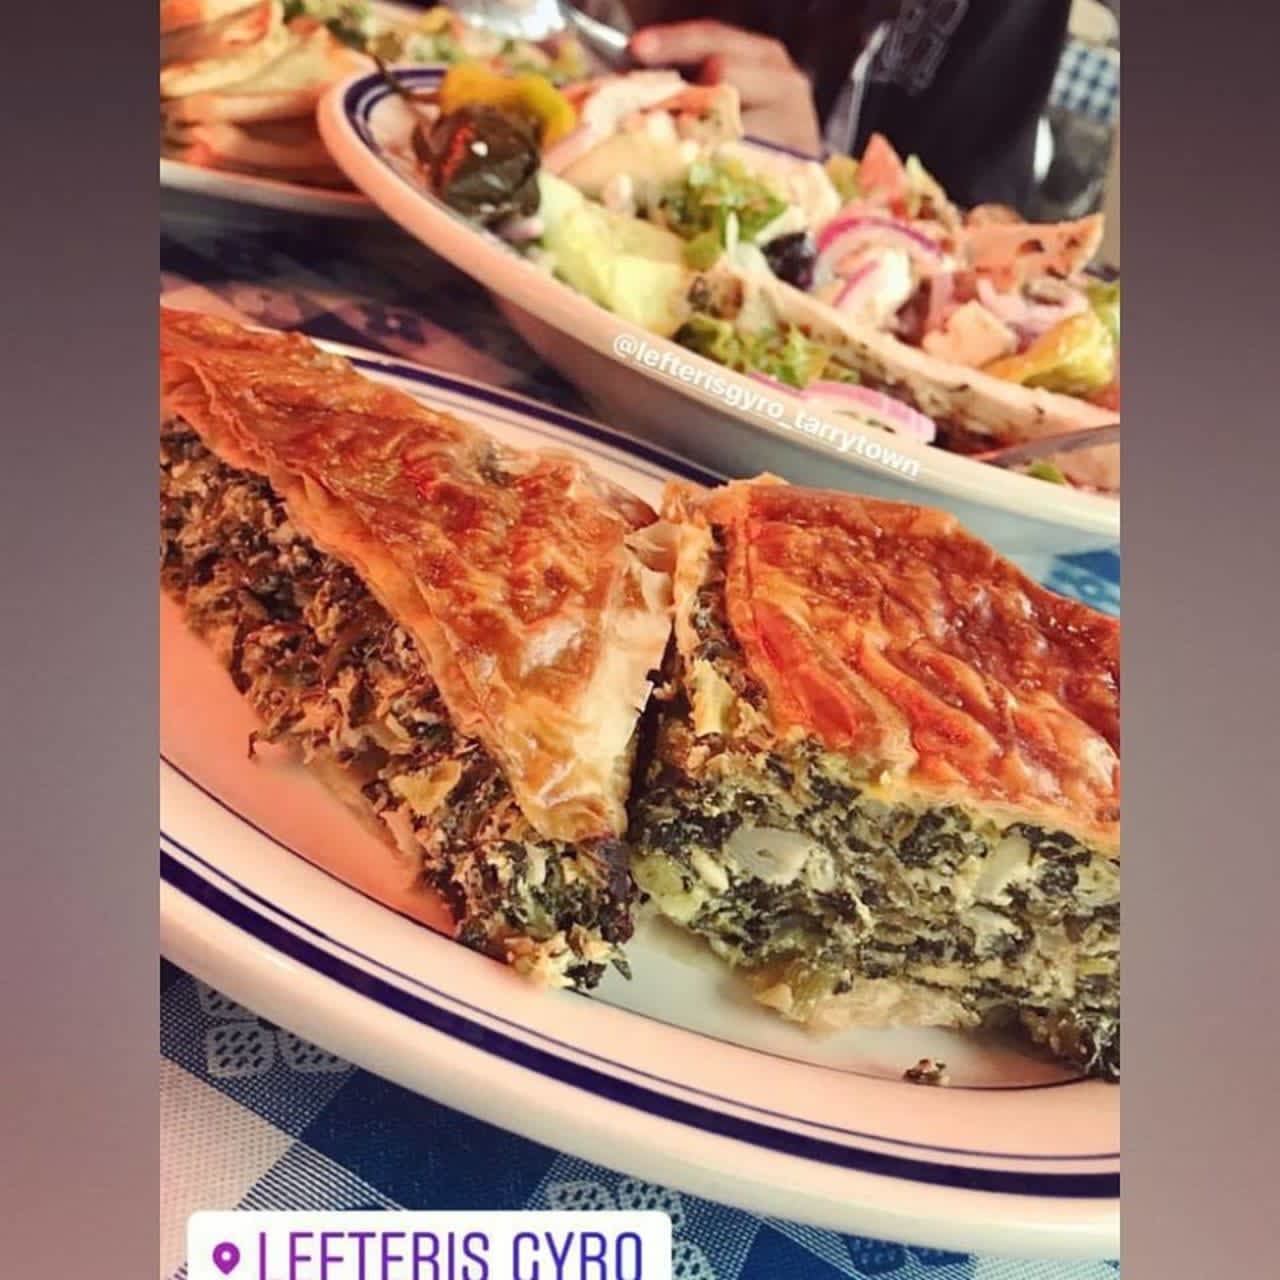 Spanakopita (spinach pie) from Lefteris Gyro, which opened a new location serving Greek cuisine in Pleasantville (501 Marble Ave.) on Monday, Sept. 30.